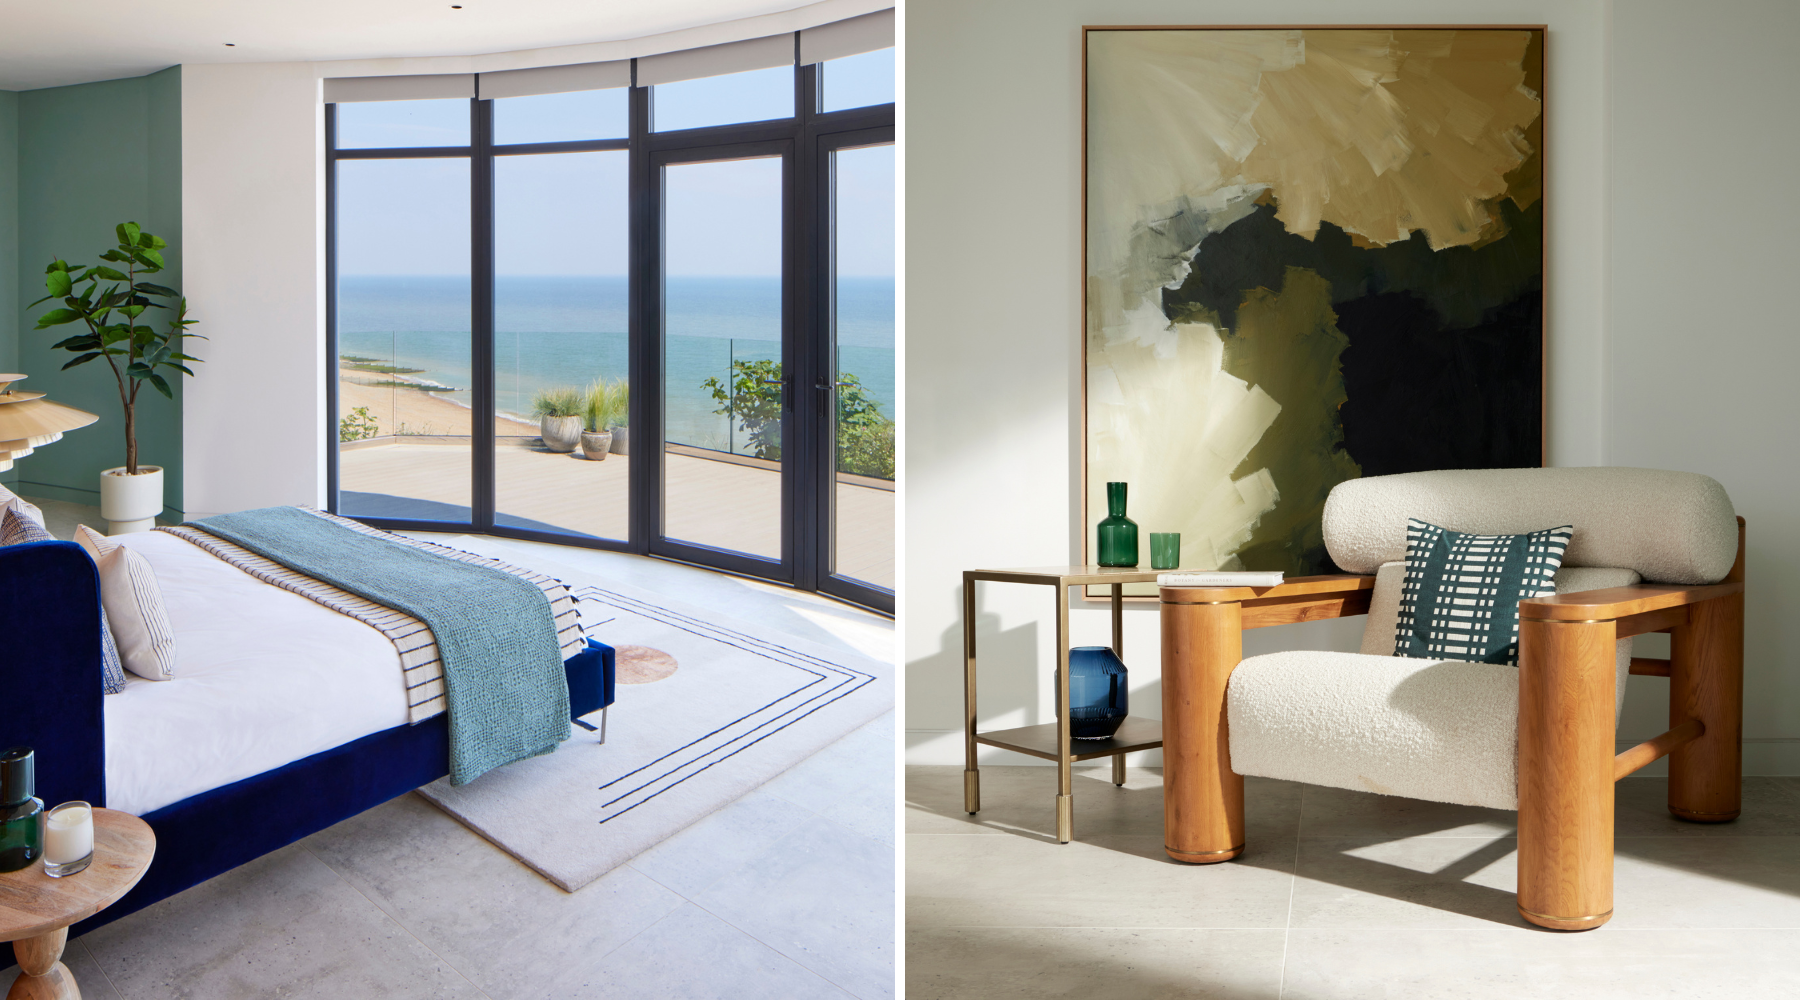 Omaze Million Pound House Draw - Kent House main bedroom panoramic sea views and armchair with abstract painting